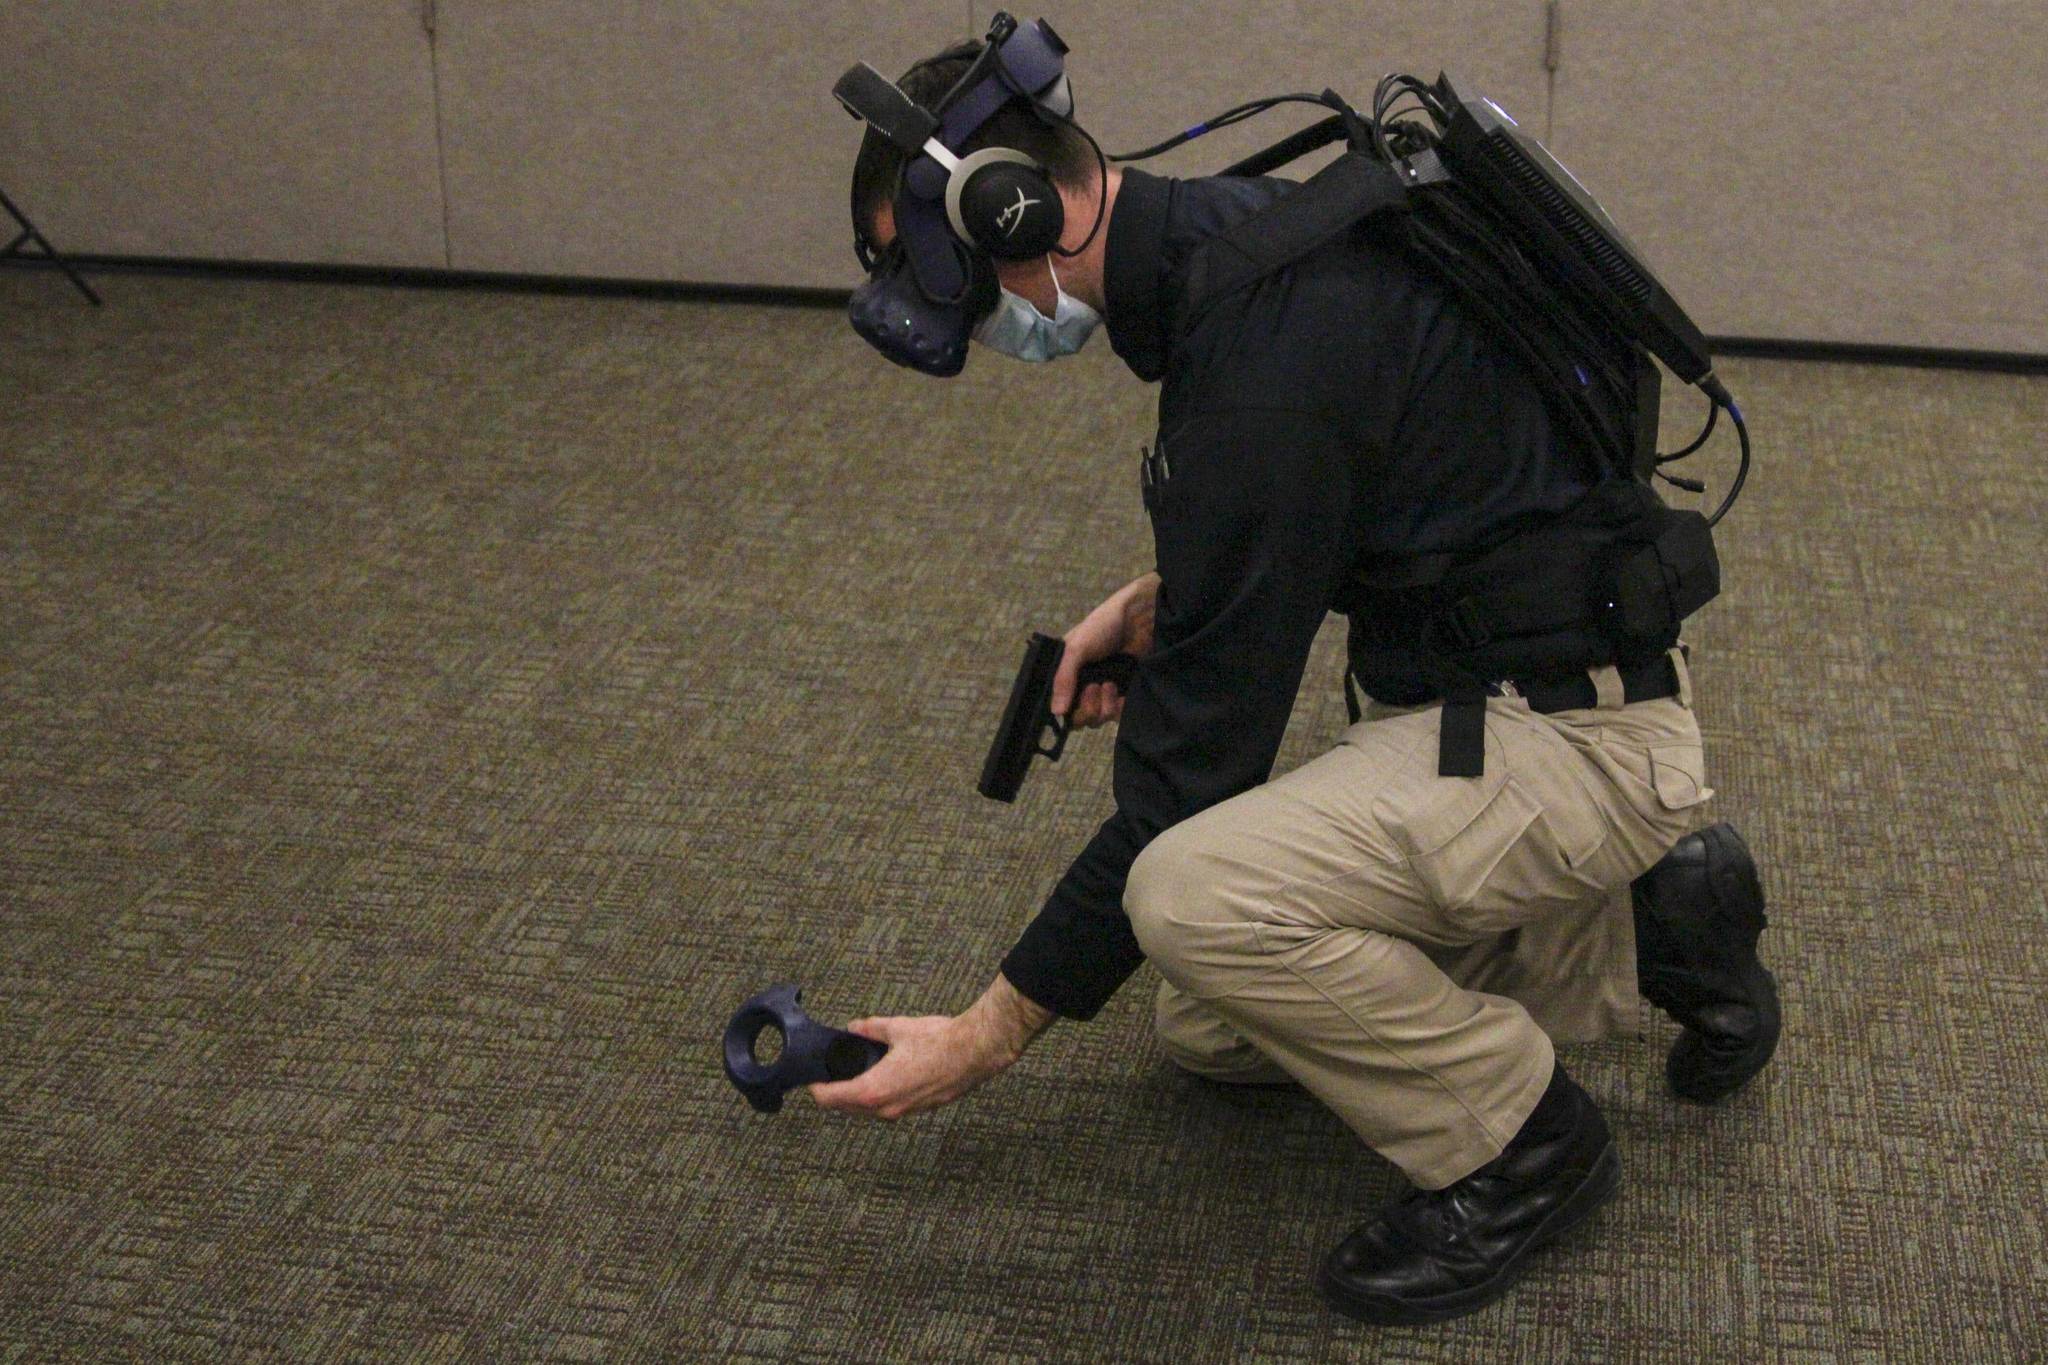 Detective Patrick Taylor picks up controllers representing his sidearm and police utility items during VR training simulation on March 17, 2021. The computer maintaining the simulation is visible on his back. (Michael S. Lockett / Juneau Empire)